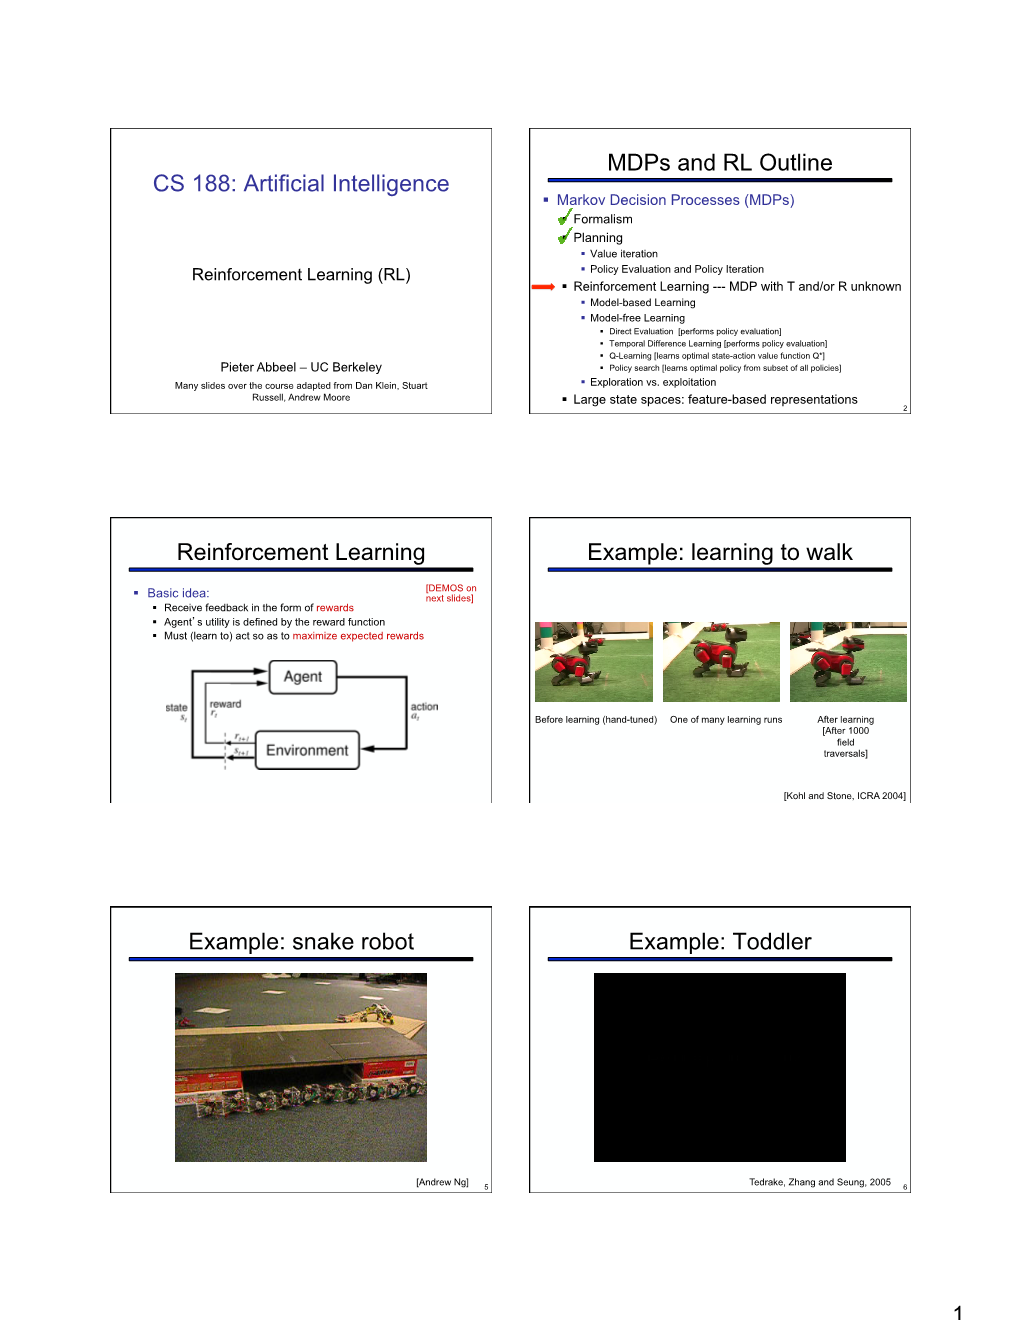 Cs188 Lecture 10 and 11 -- Reinforcement Learning 6PP.Pdf